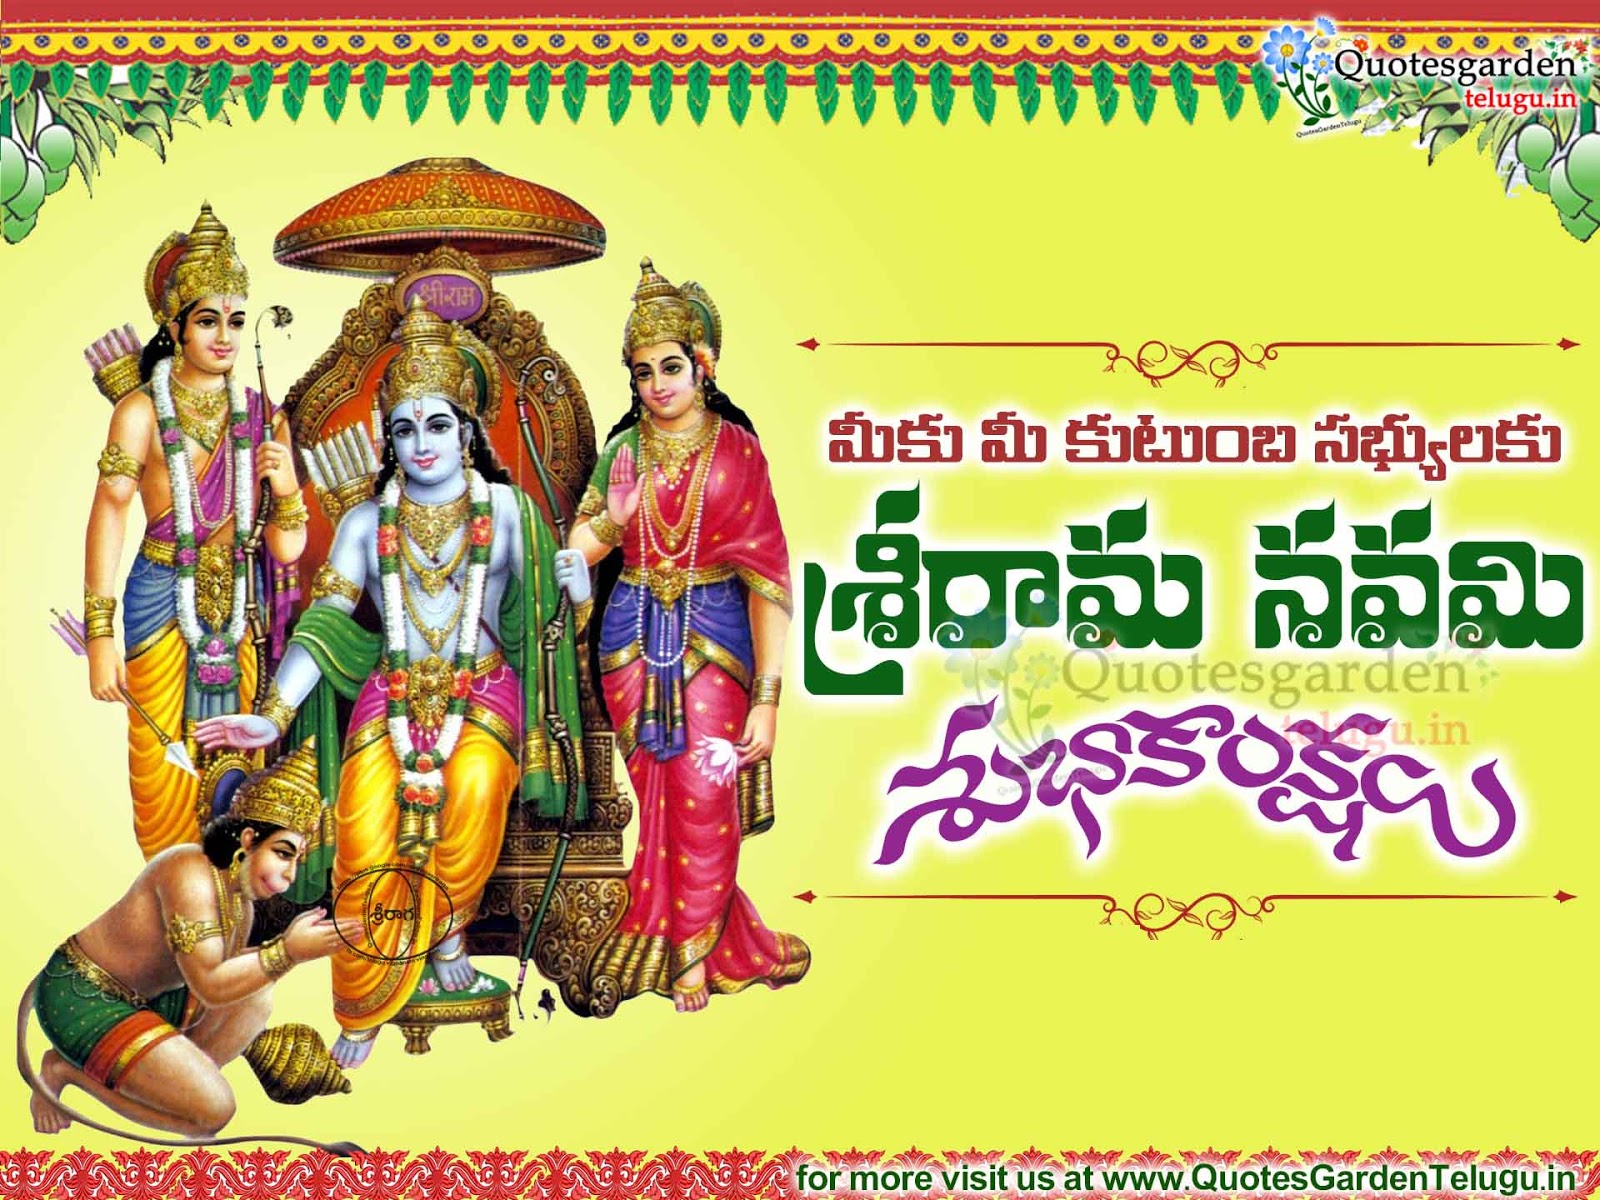 Sri Rama Navami 2017 Greetings Quotes wishes messages ...